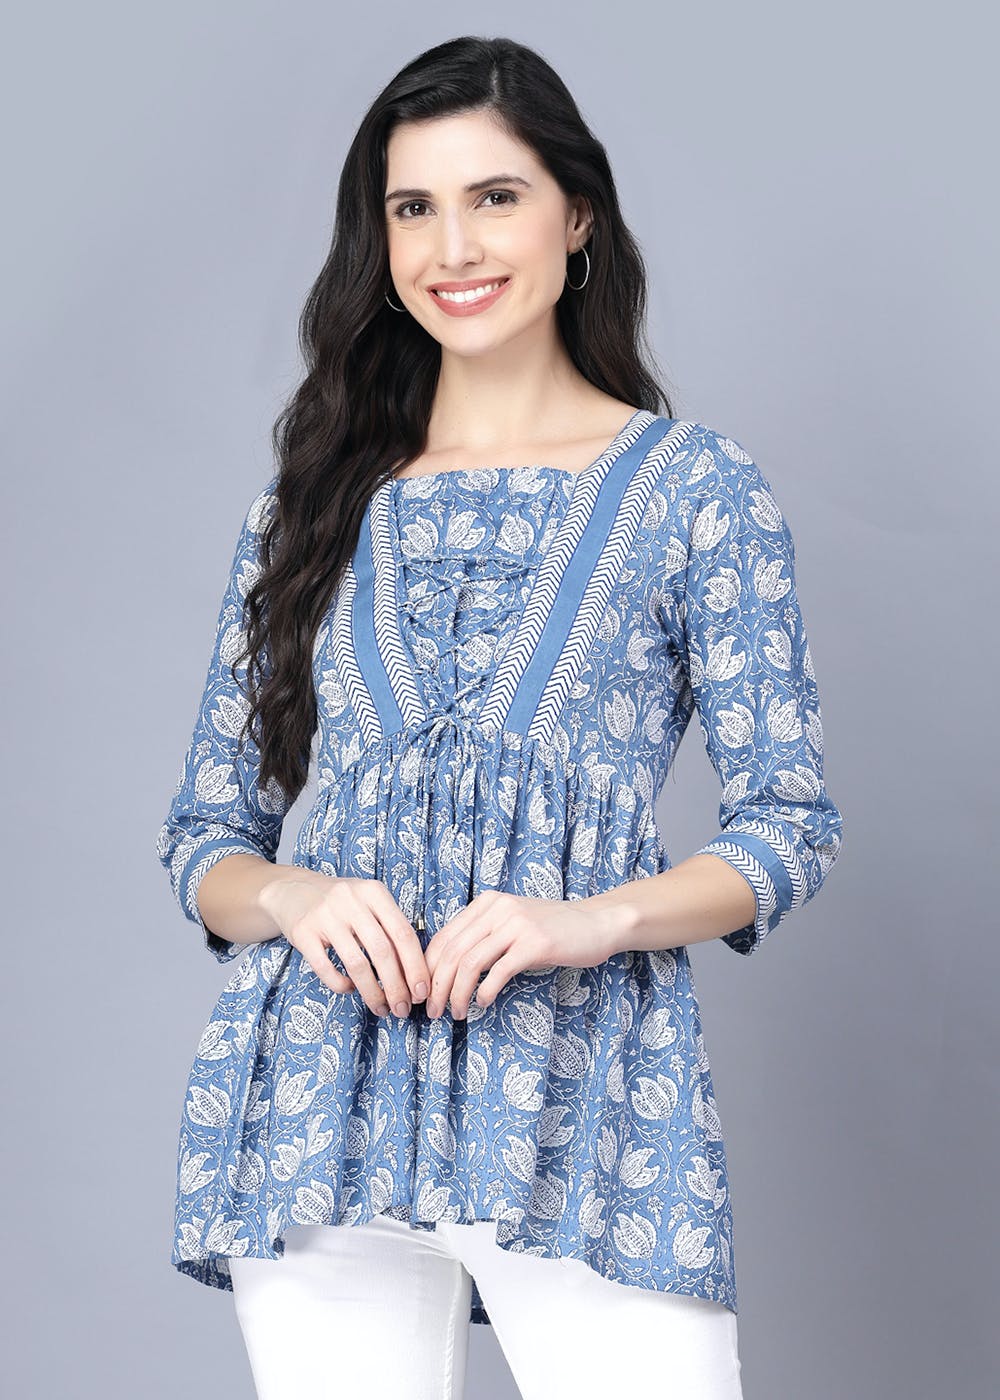 Get Cotton Printed 3/4 Sleeve Square Neck Blue Women Top at ₹ 2499 ...